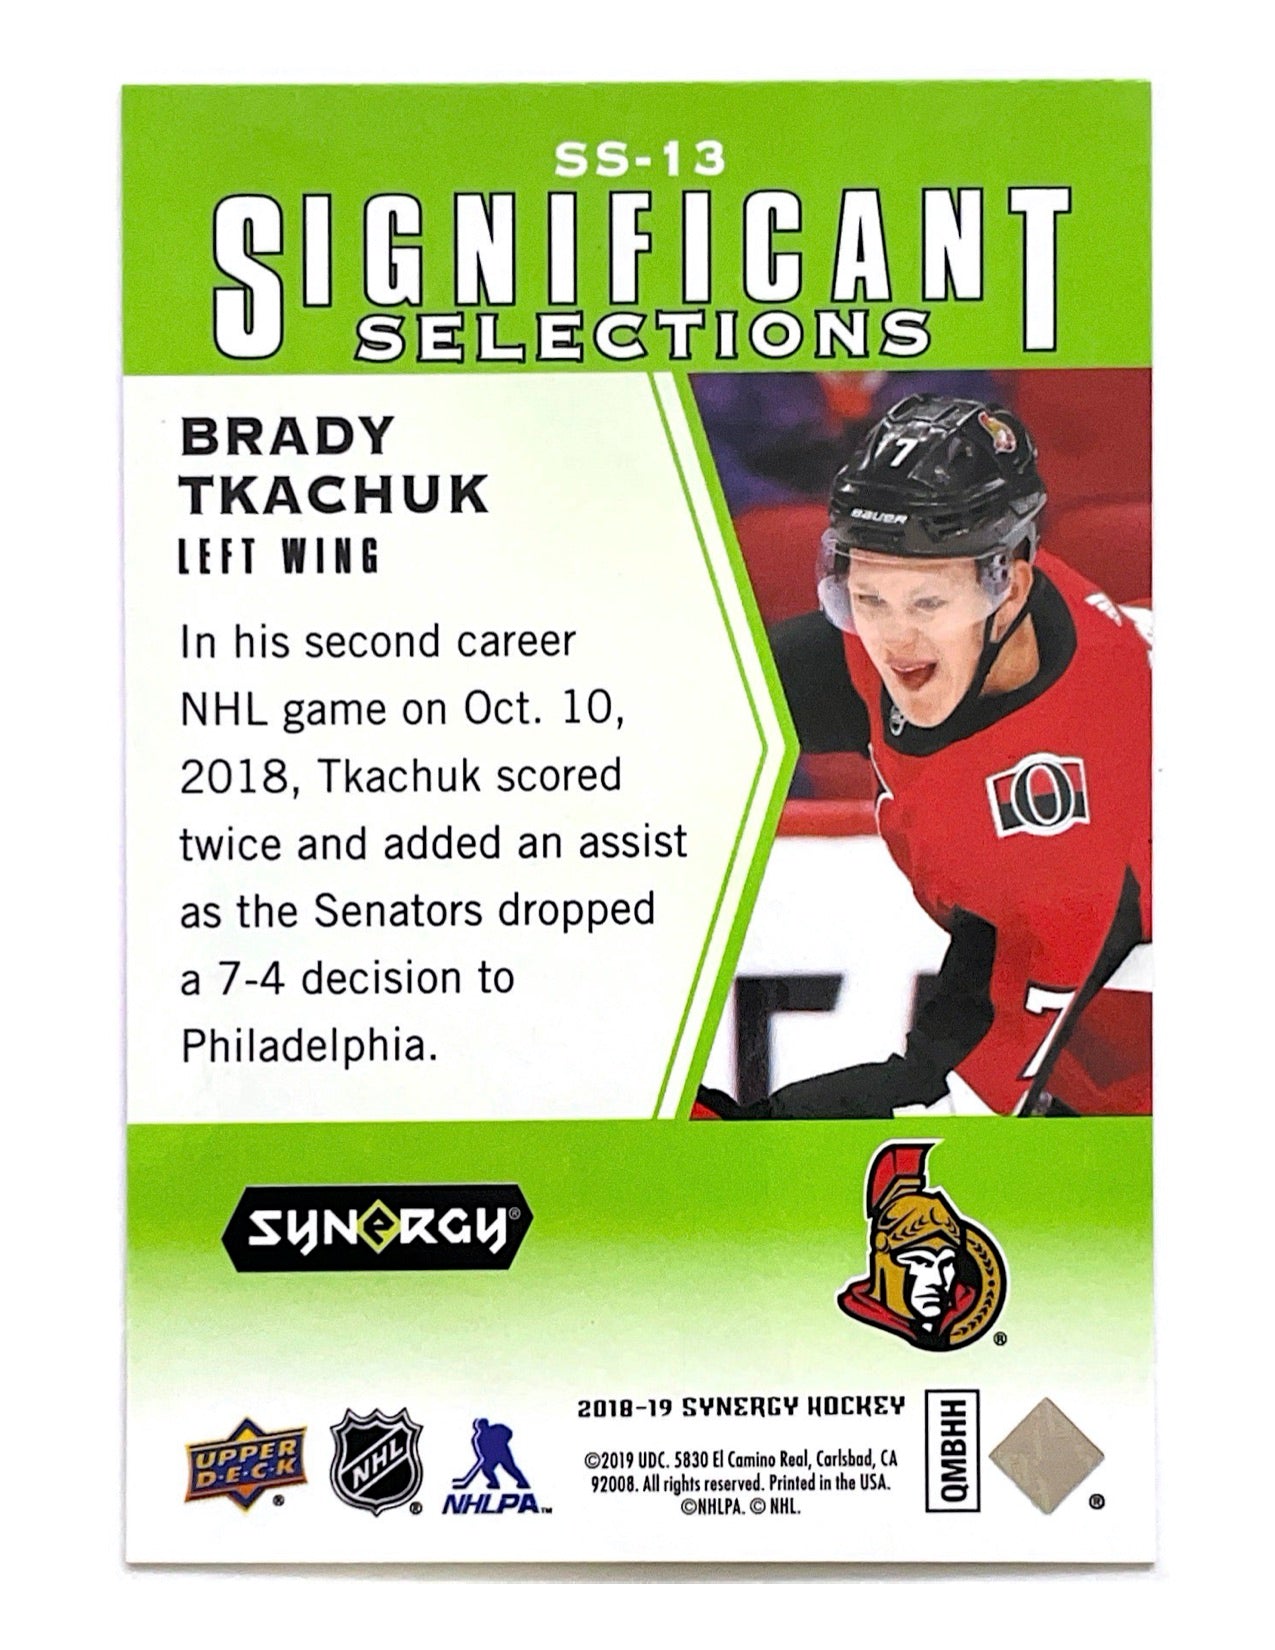 Brady Tkachuk 2018-19 Upper Deck Synergy Significant Selections Green #SS-13 - 155/199